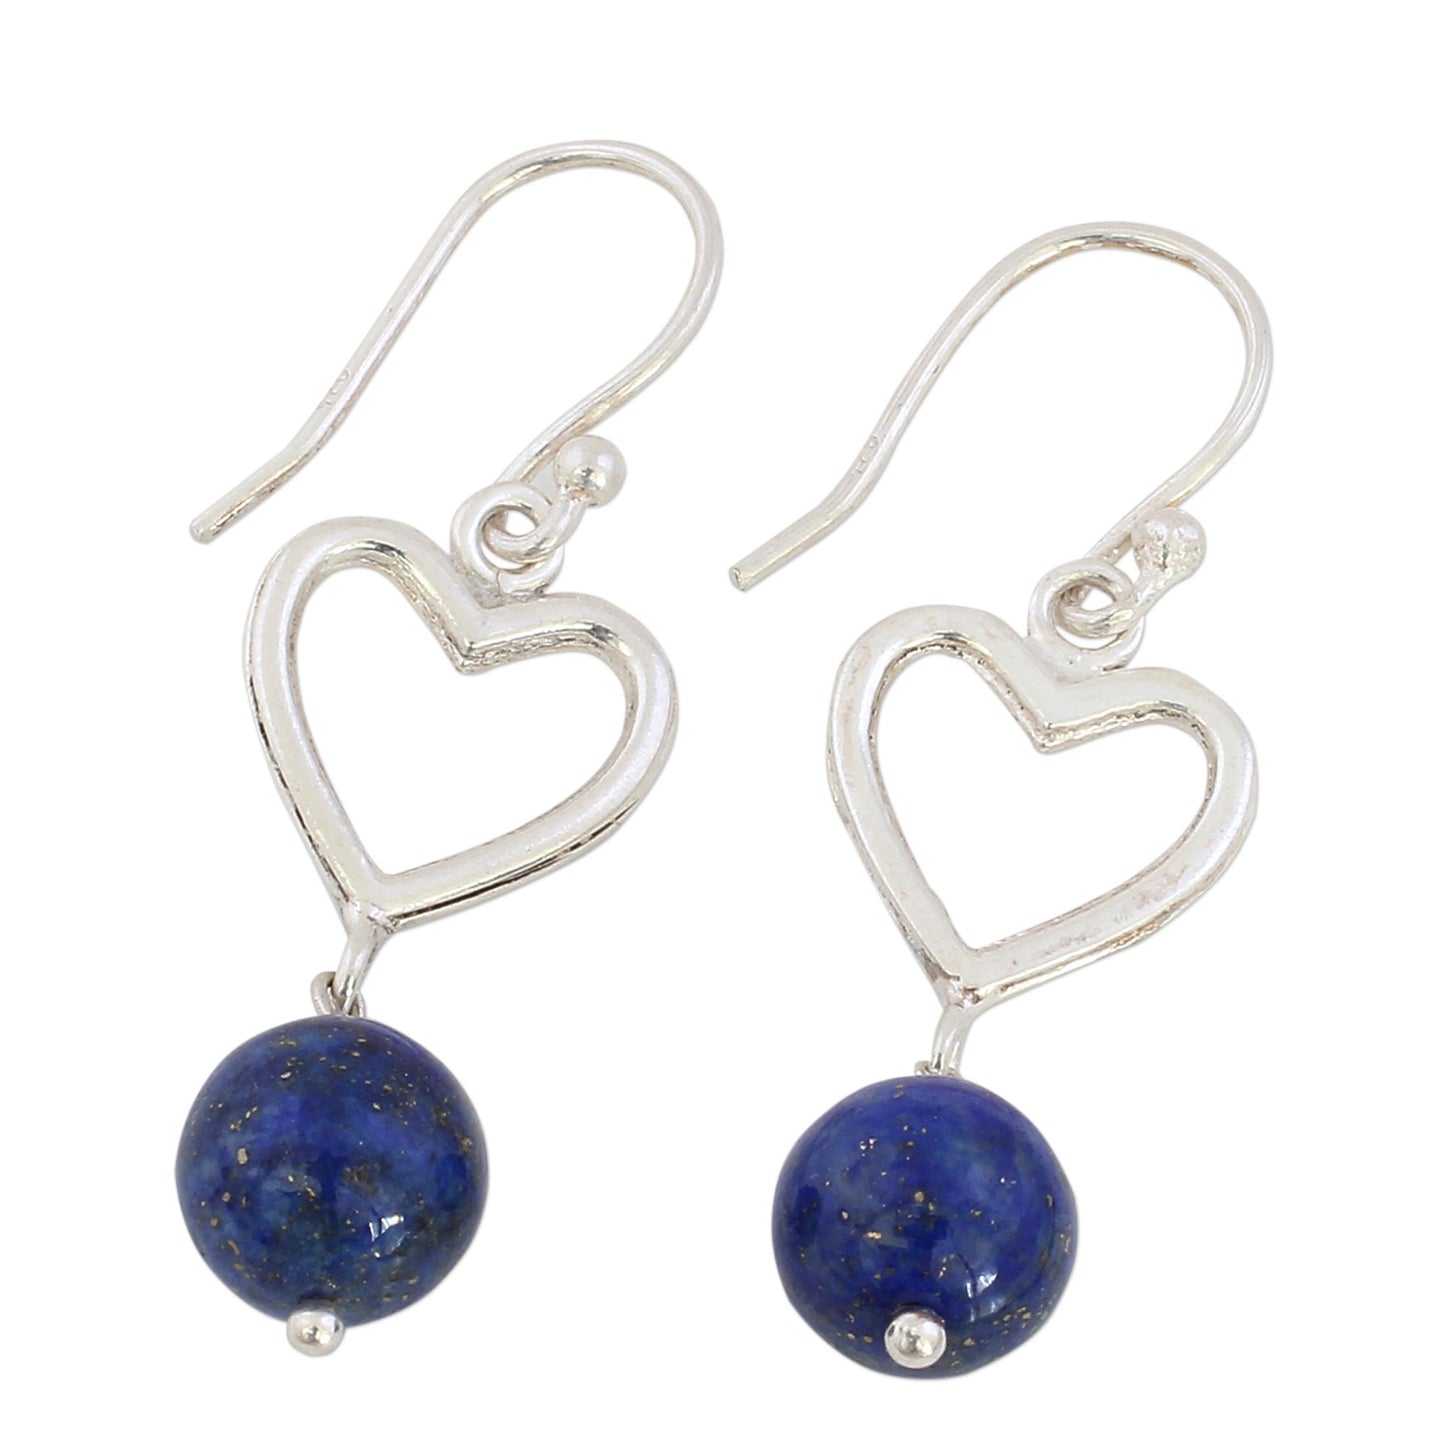 Majestic Globes Handcrafted Lapis Lazuli and Sterling Silver Dangle Earrings